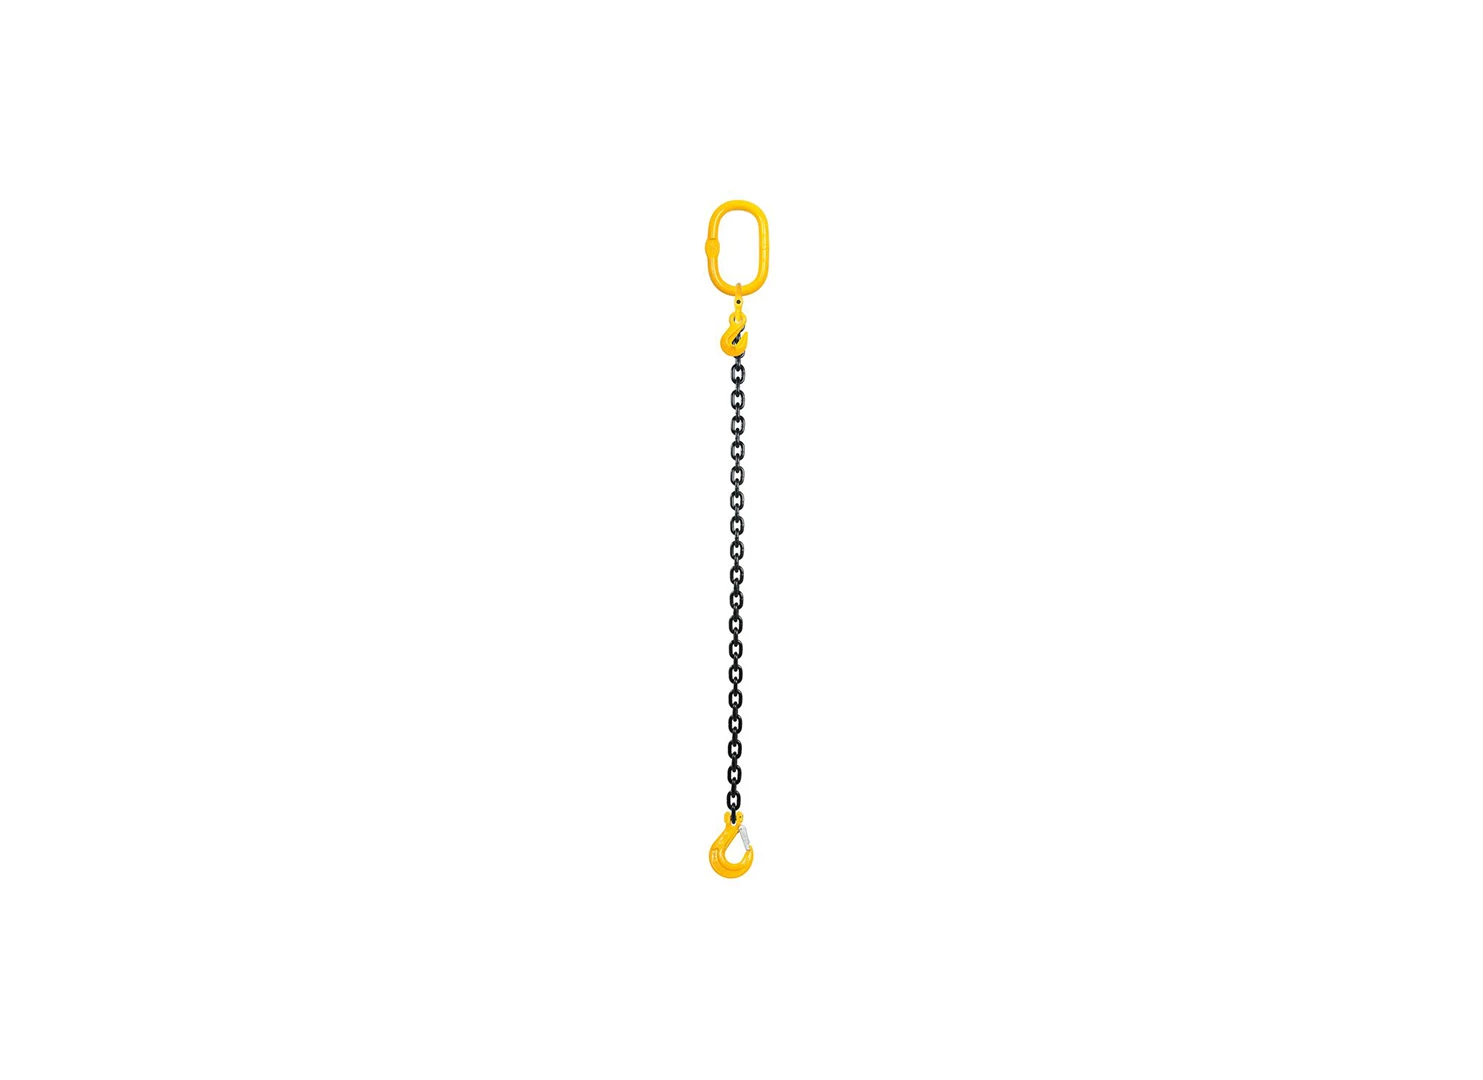 Product: Chain sling 1, 3, 15tx10mmx1m